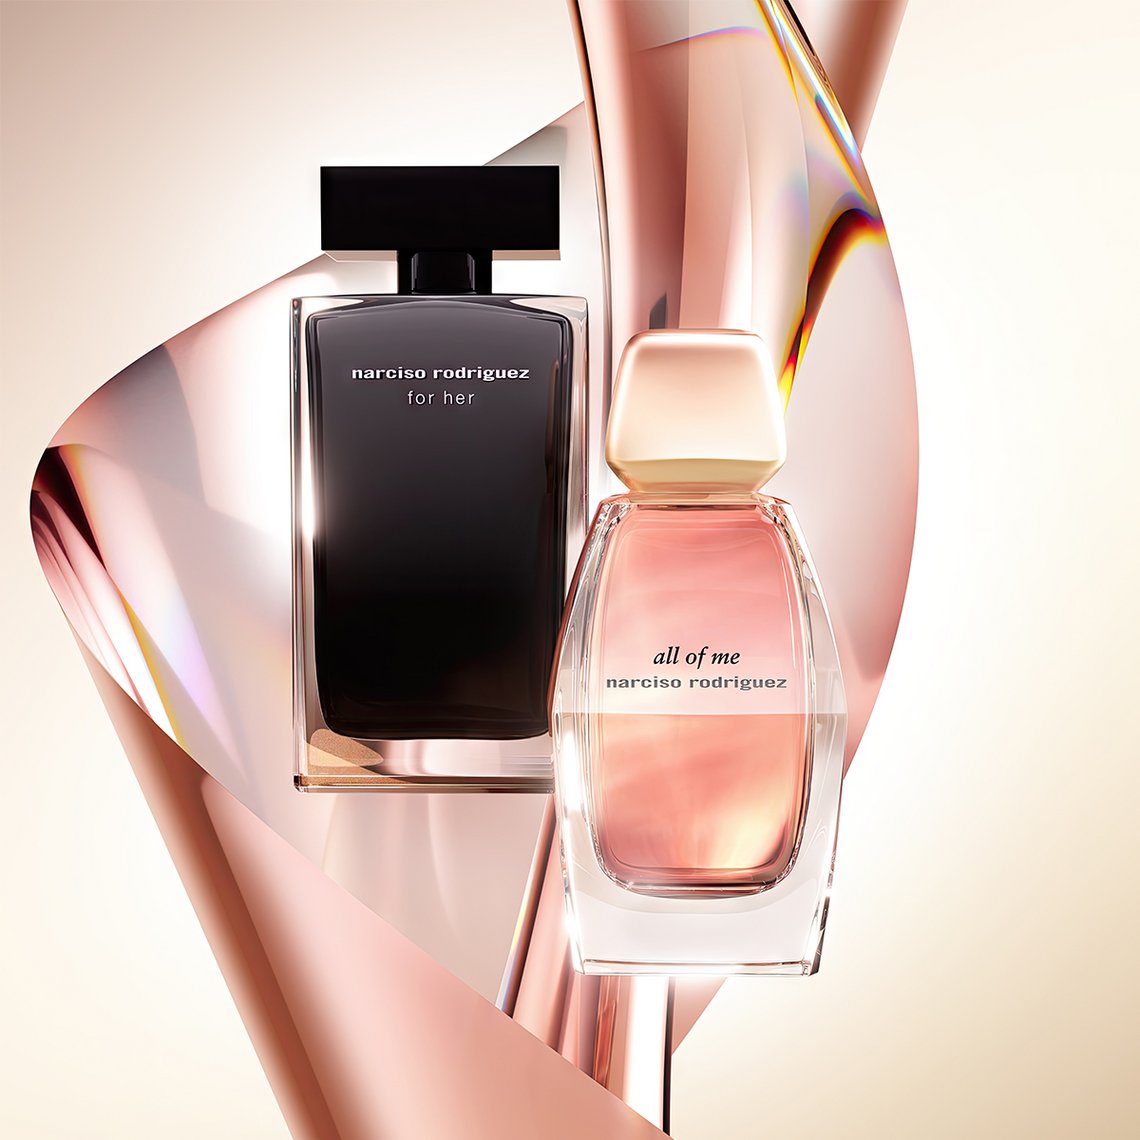 narciso rodriguez Parfum for her und all of me